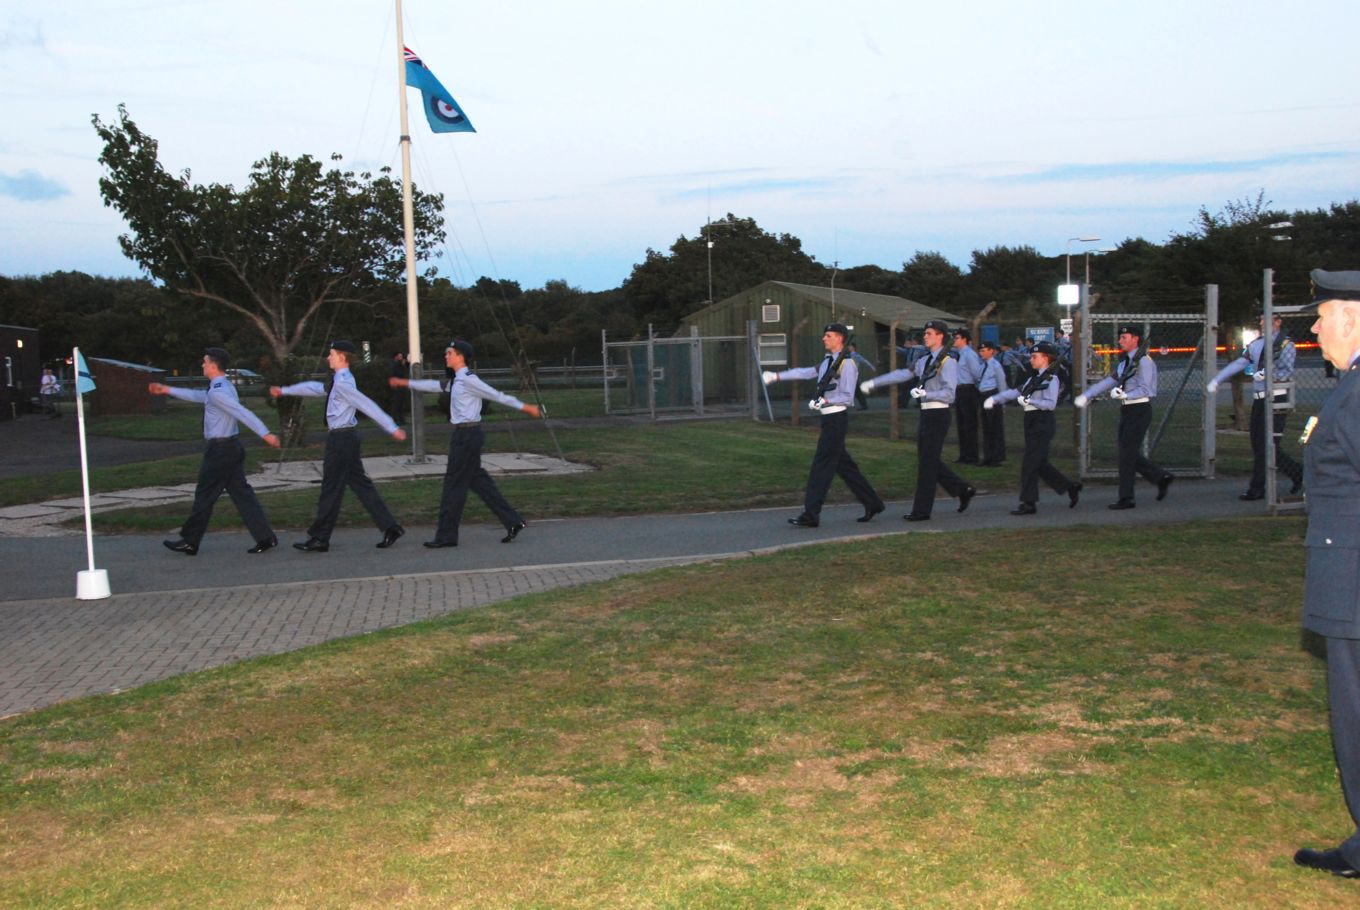 611 Squadron Air Training Corps Cadets parading